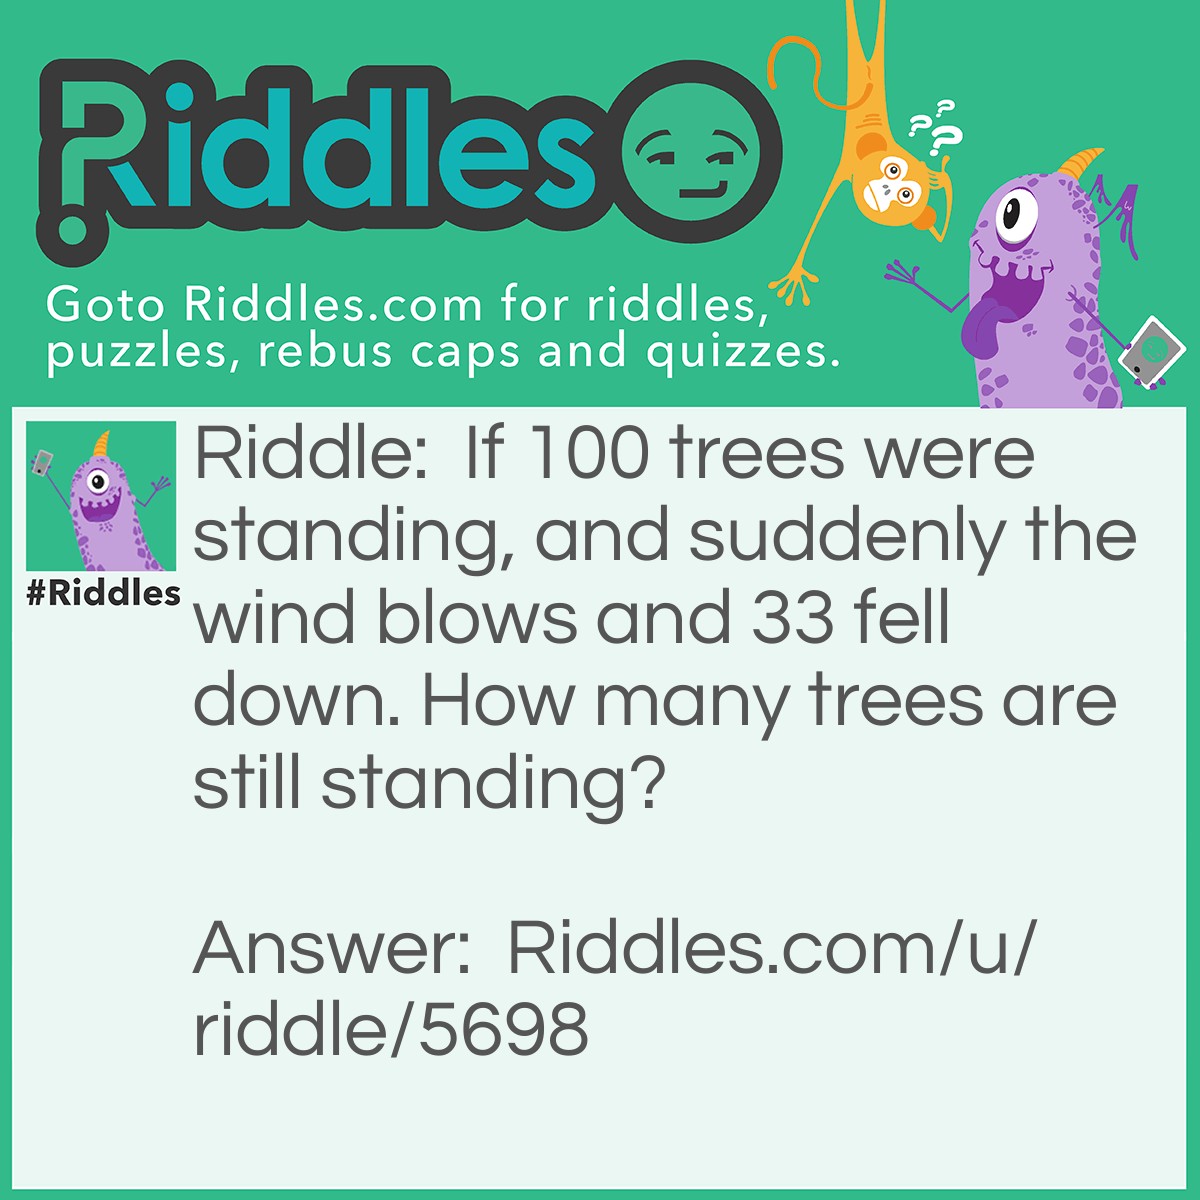 Riddle: If 100 trees were standing, and suddenly the wind blows and 33 fell down. How many trees are still standing? Answer: 70 trees. Let me make it clearer, ''suddenly the wind blows and 30 trees fell down''. so 100 trees - 30 trees = 70 trees.